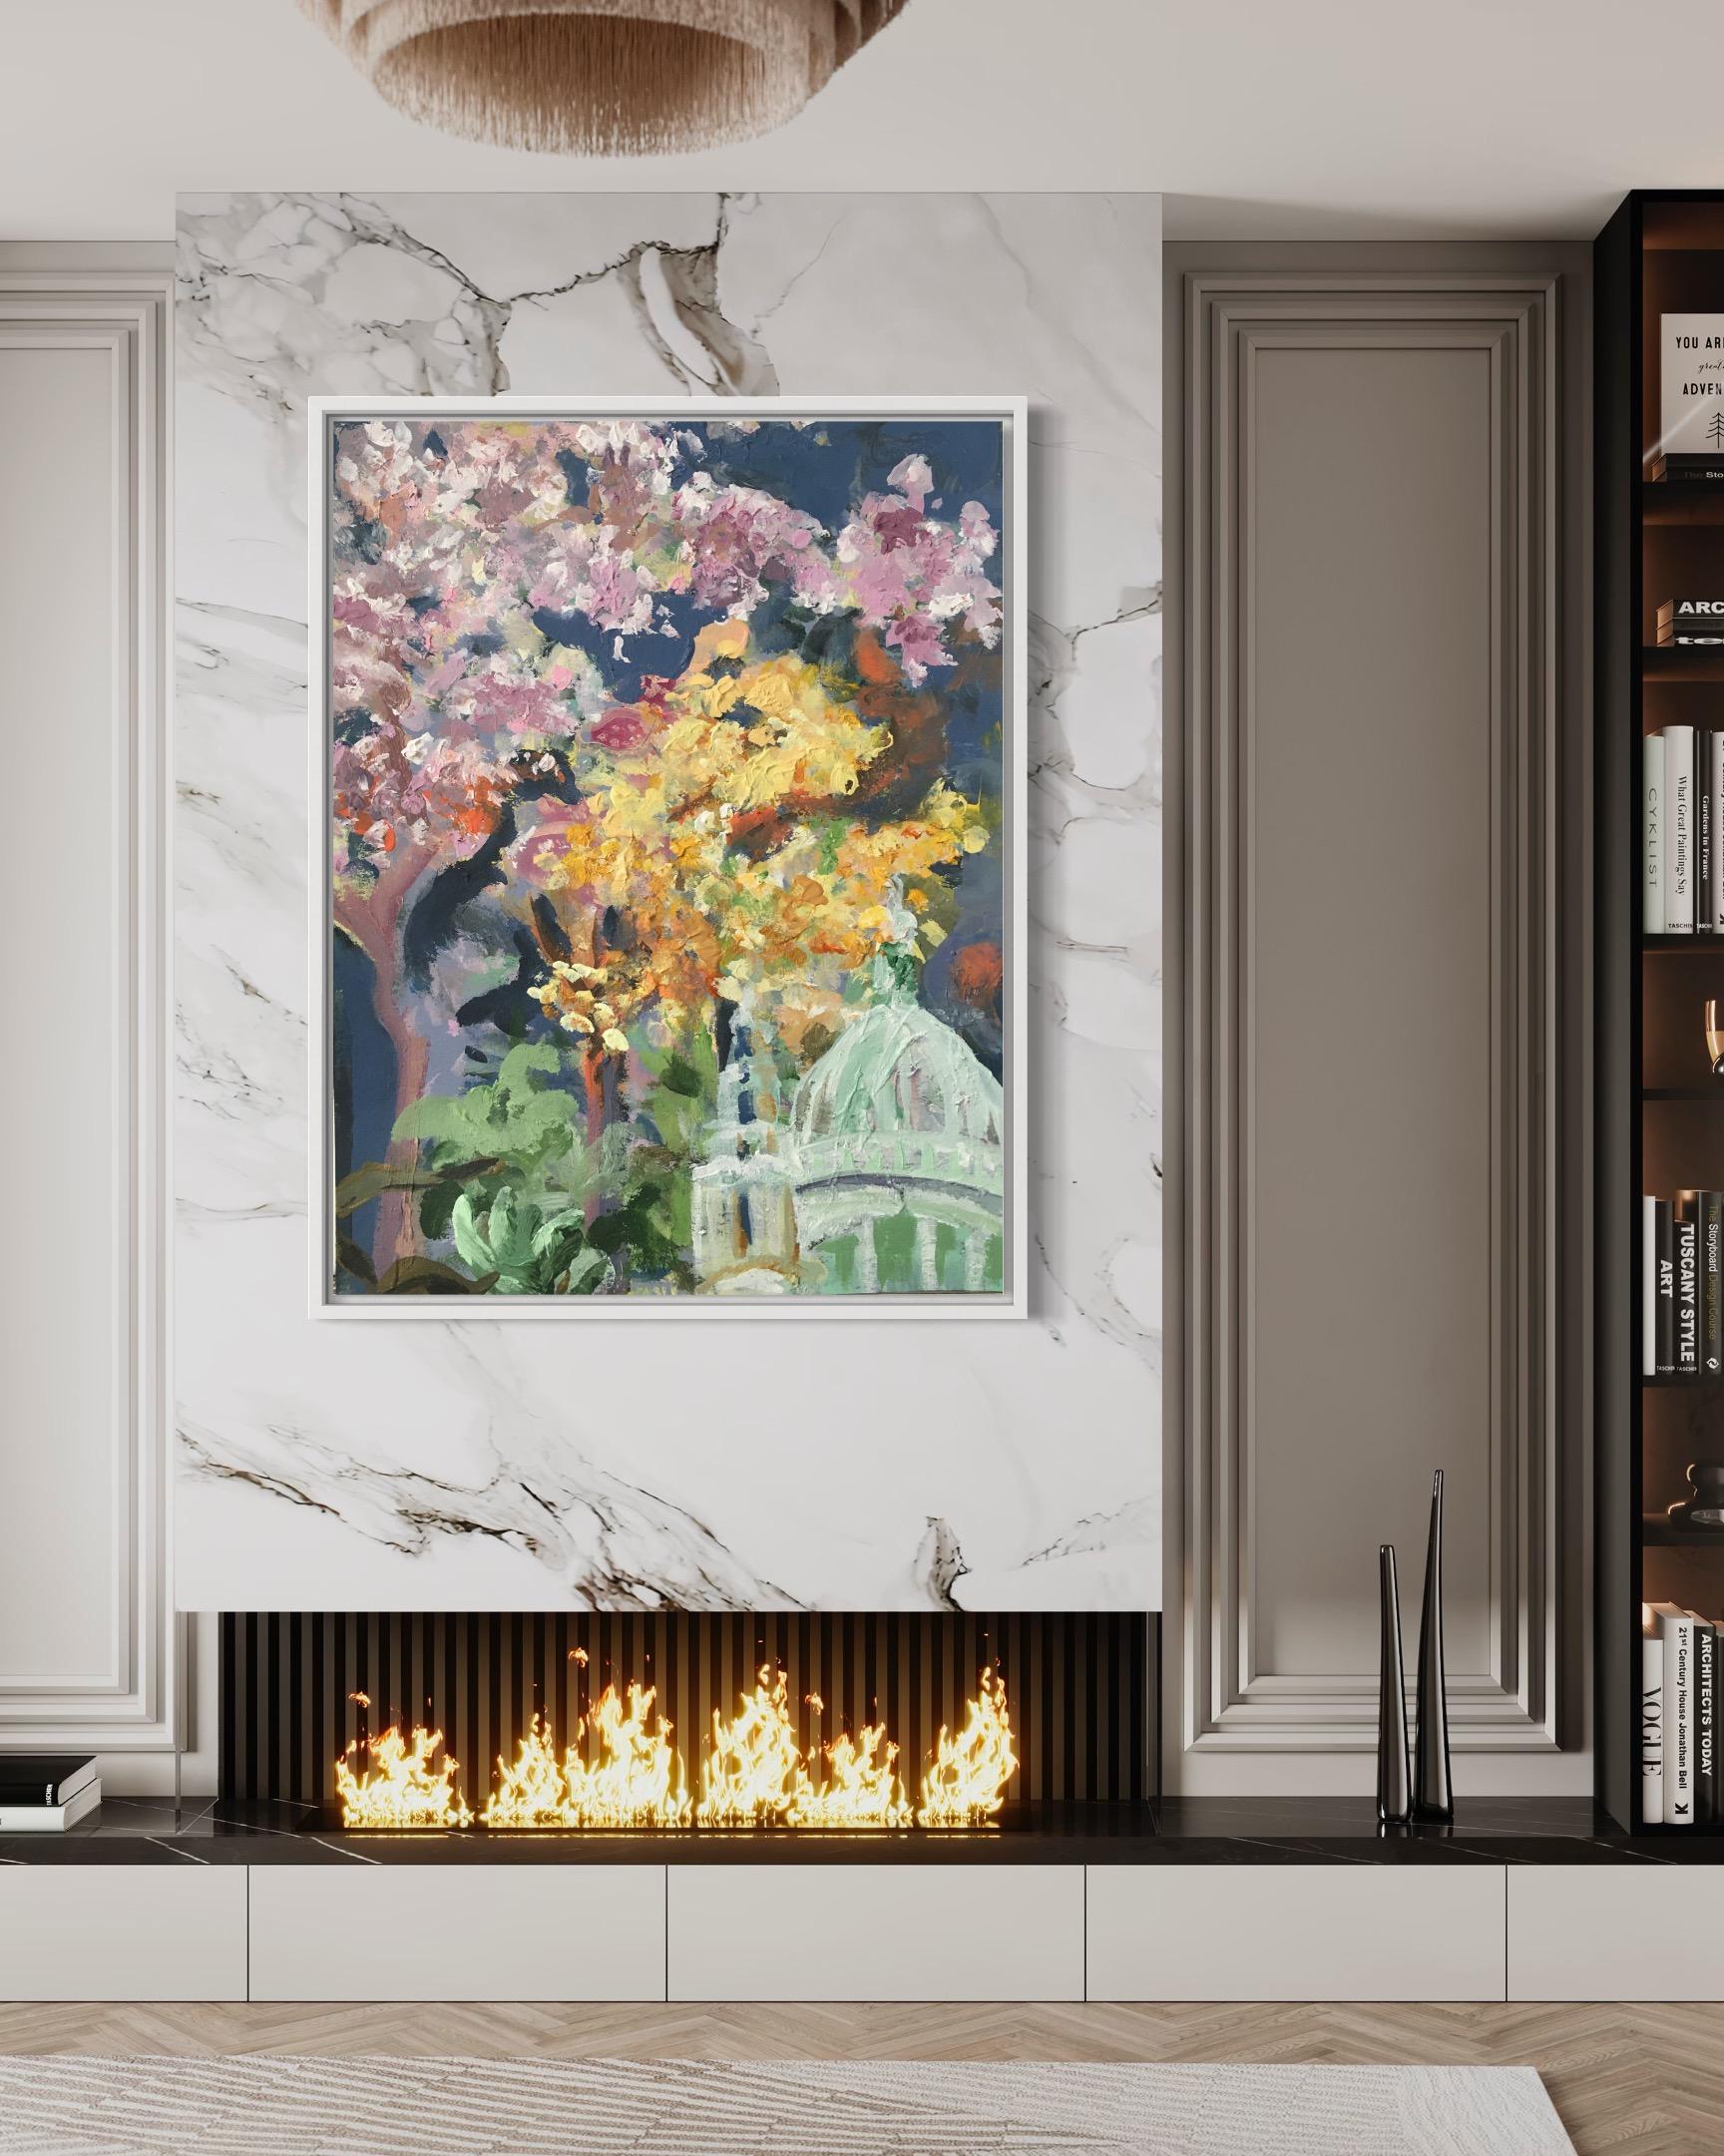 Sakura in London, St. Paul-Abstract-Rare Large Limited Five only #3/5 -UK artist - Print by Shizico Yi